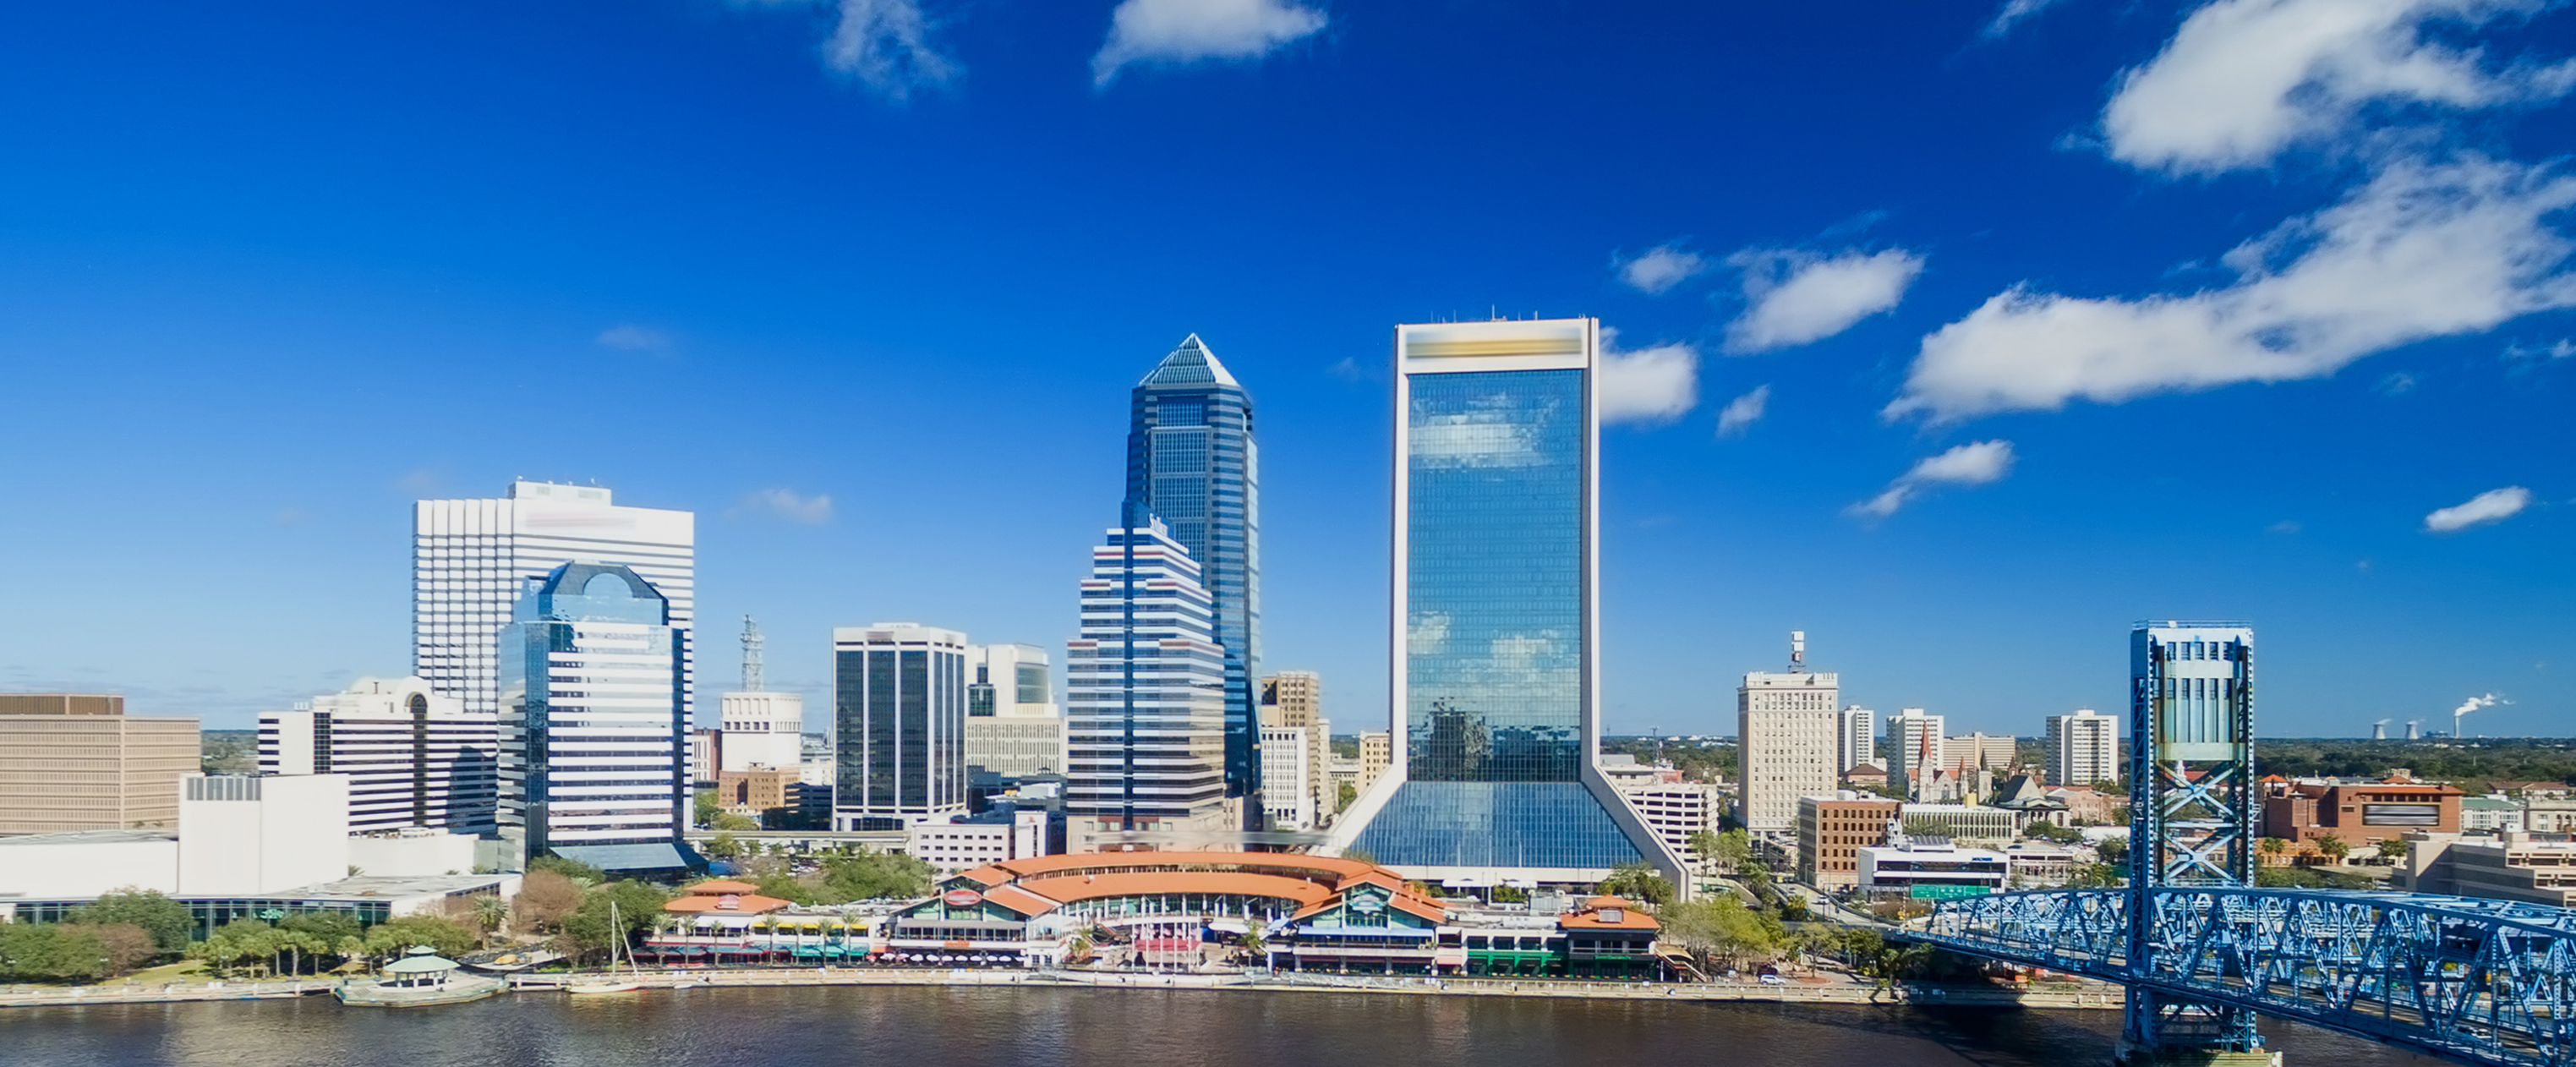 Buildings stand tall next to bright blue skies along the river in Jacksonville, Floirda.